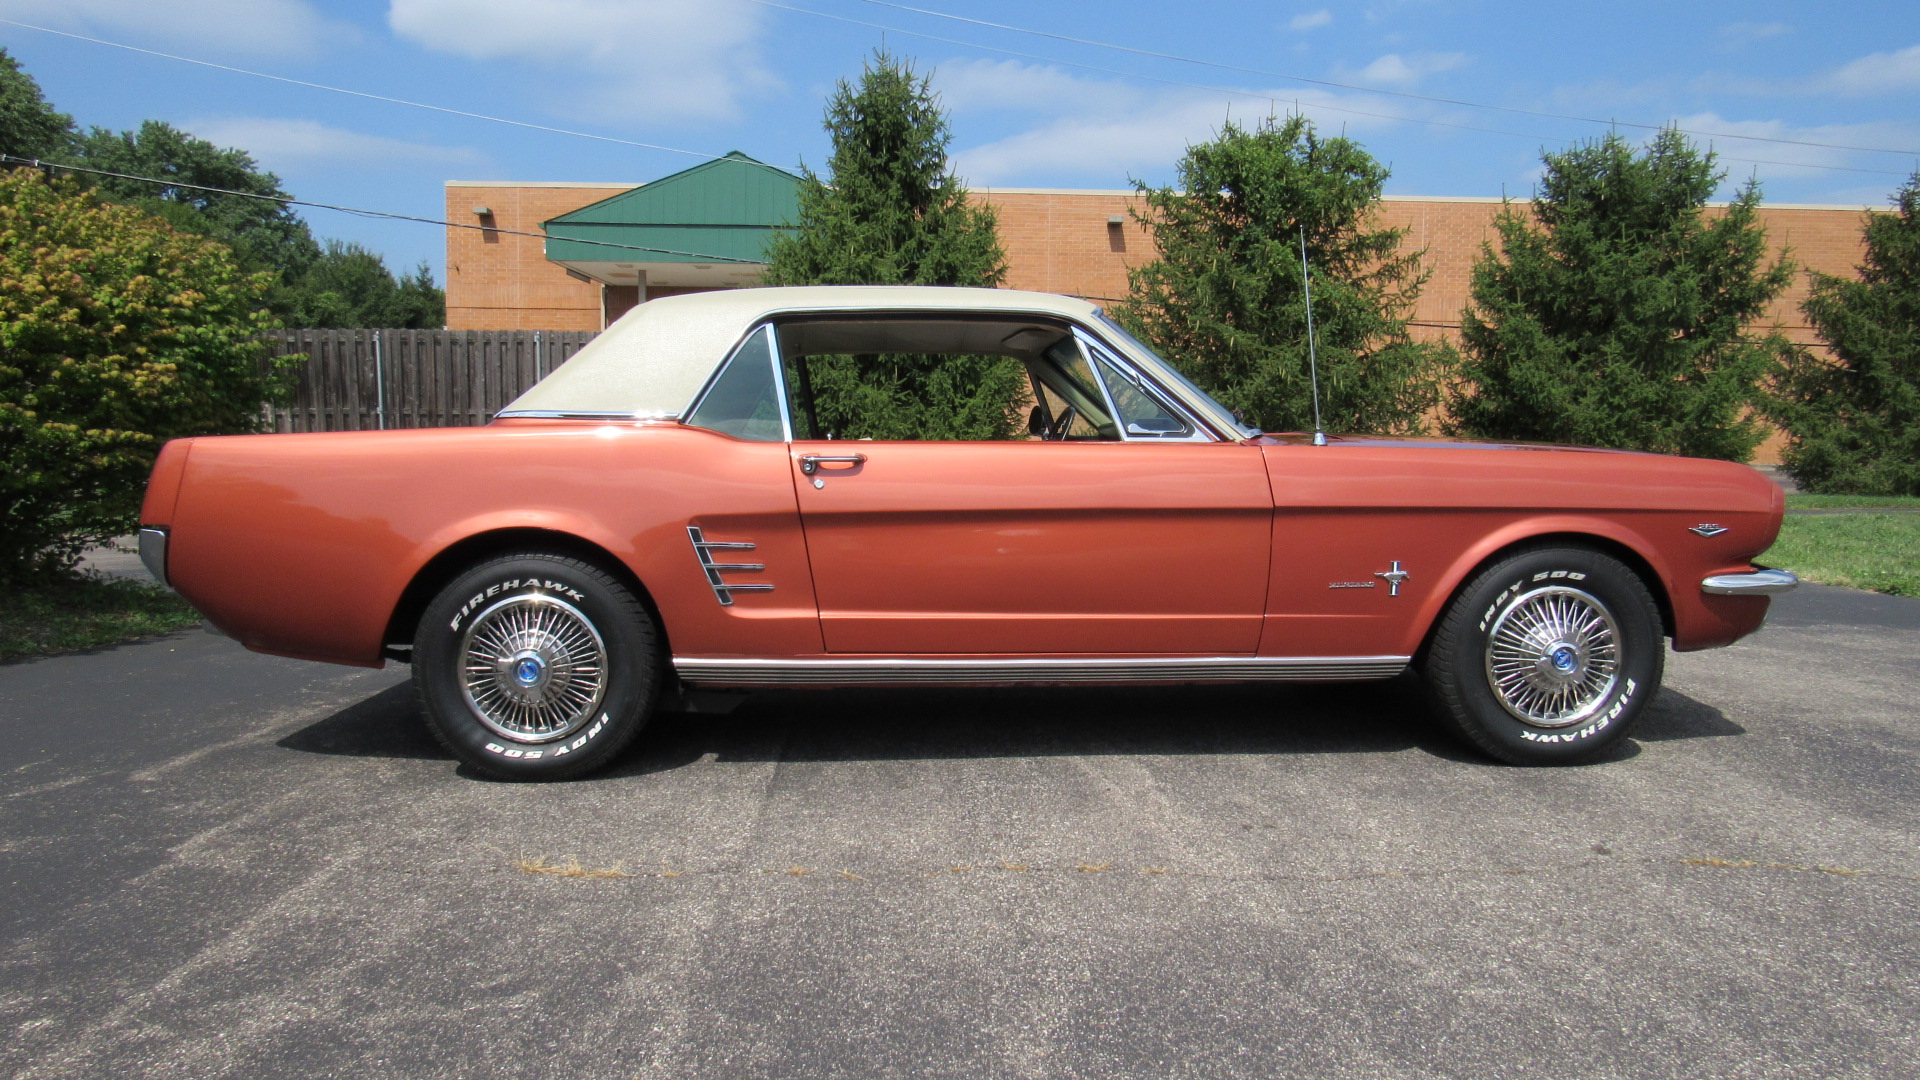 1966 Mustang, 4 Speed, 289, Restored, Excellent Paint, SOLD!